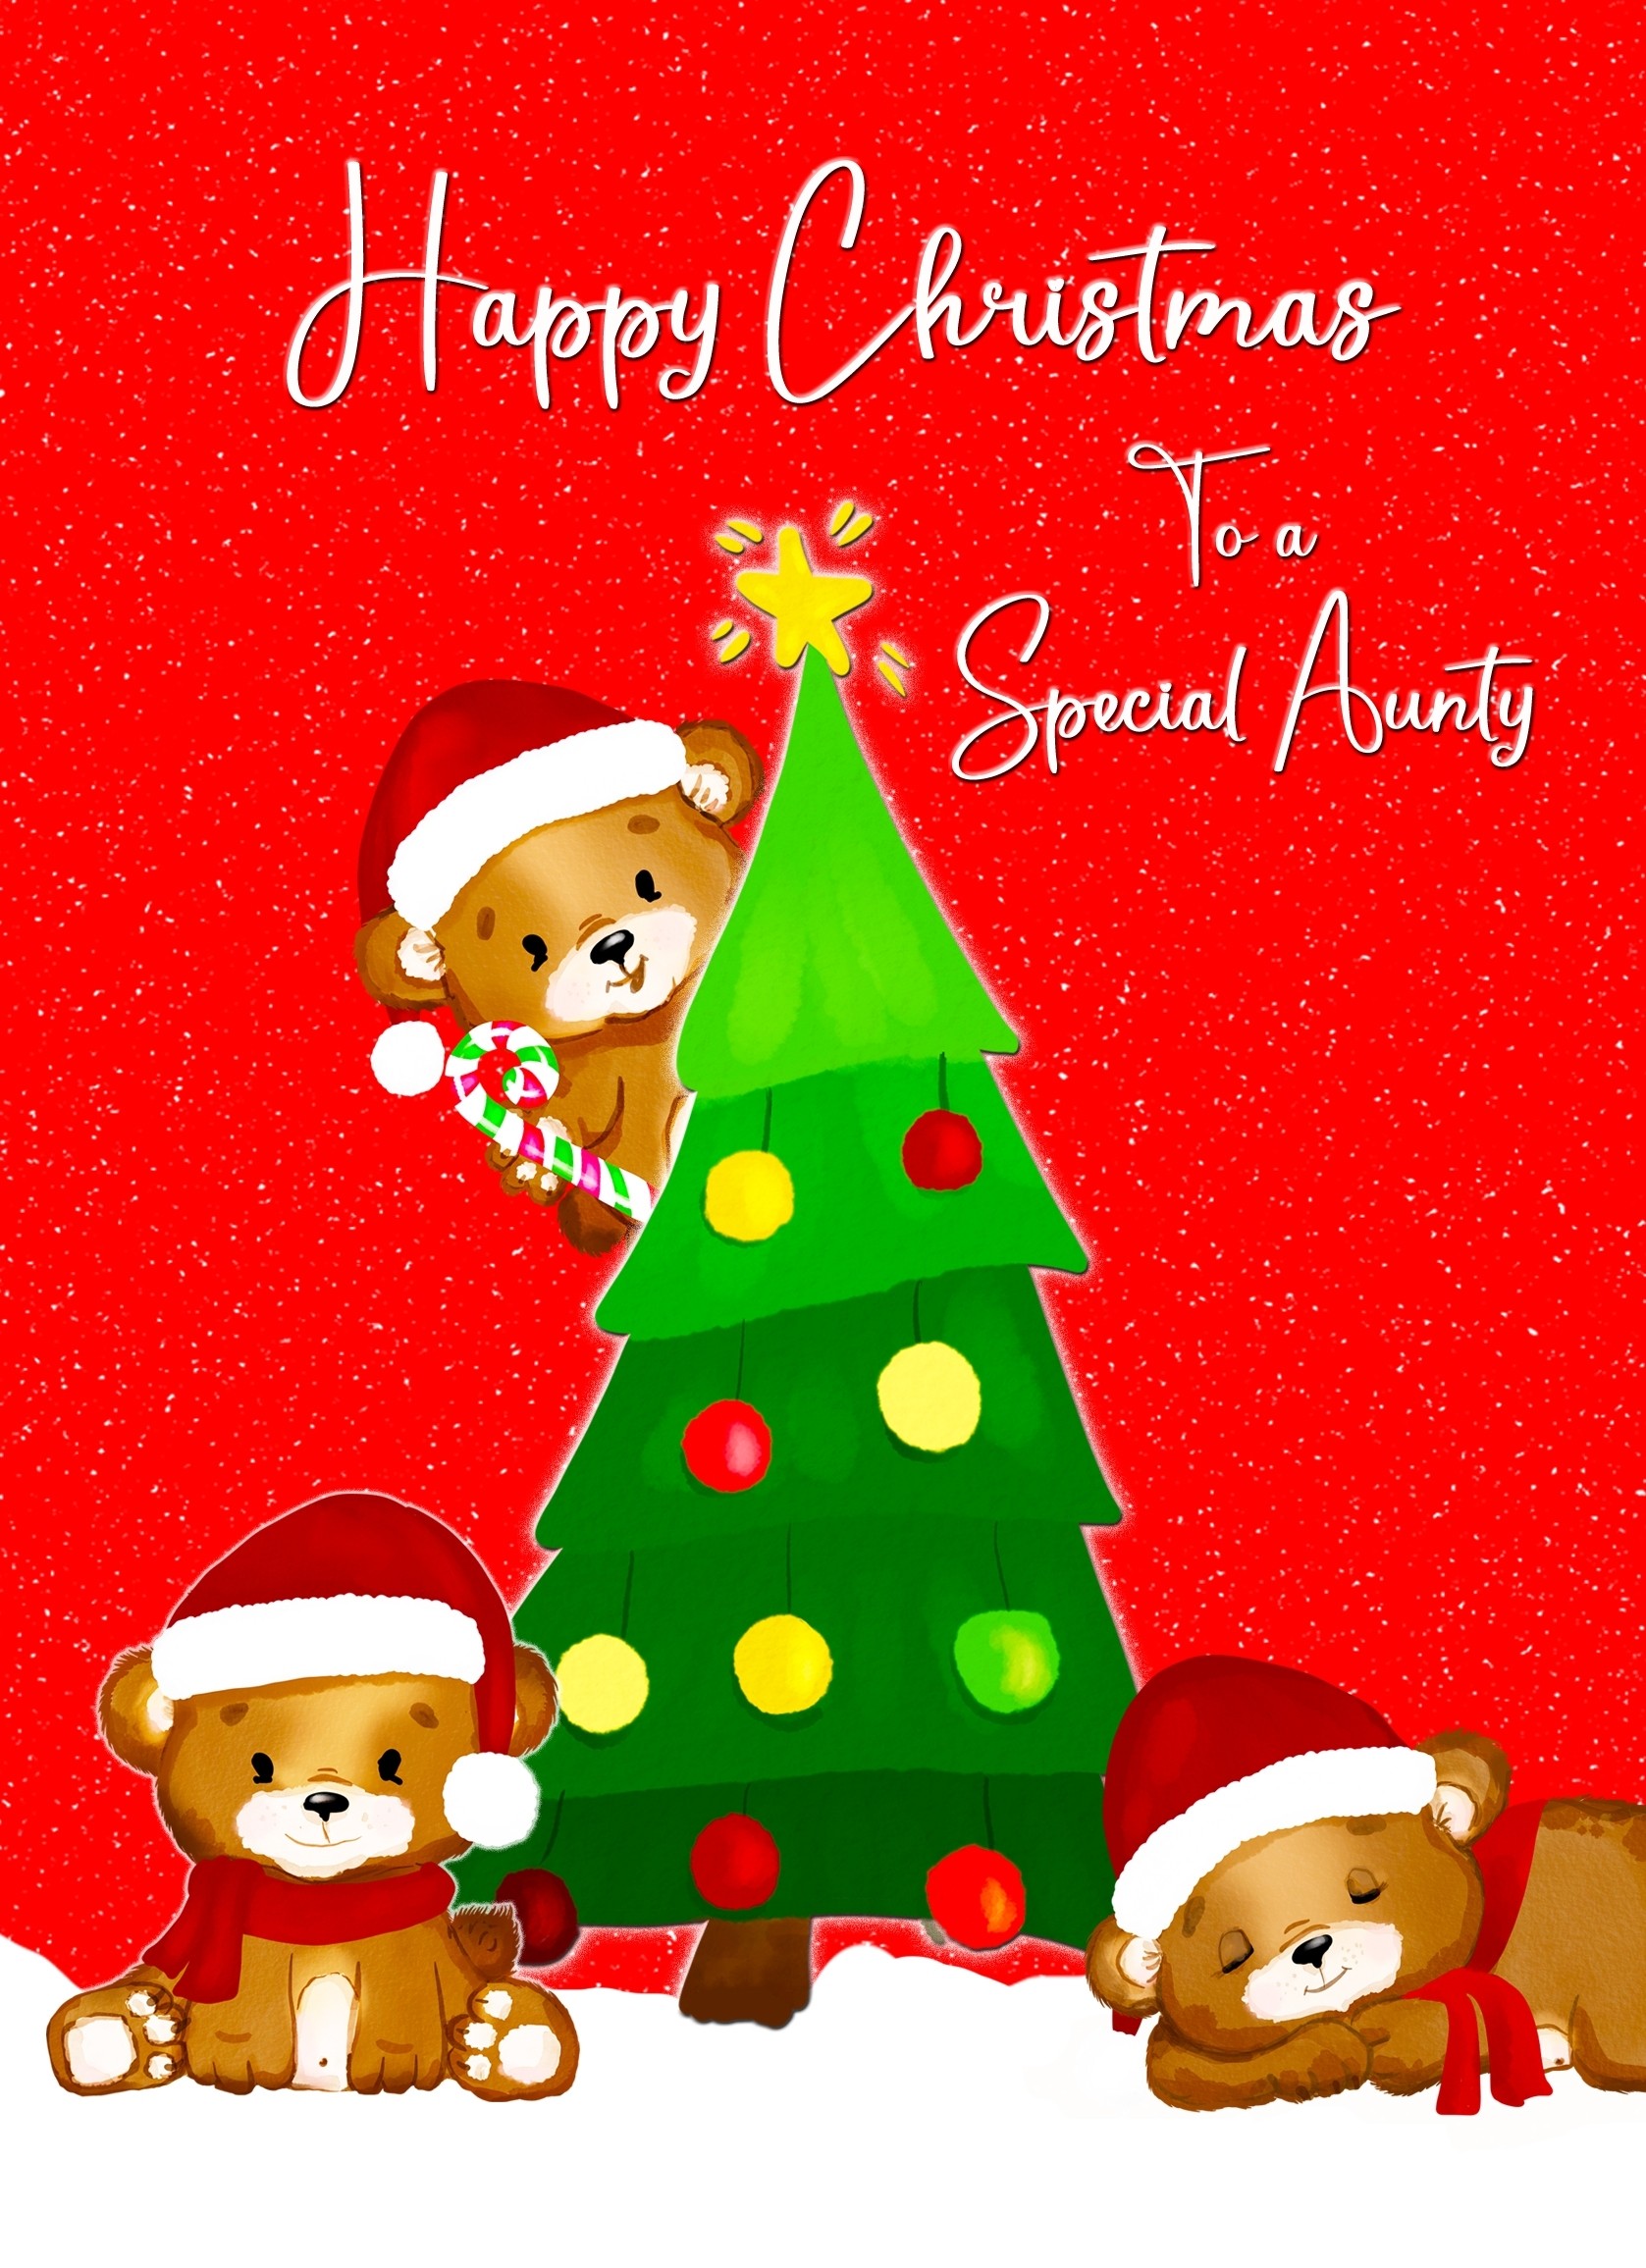 Christmas Card For Aunty (Red Christmas Tree)